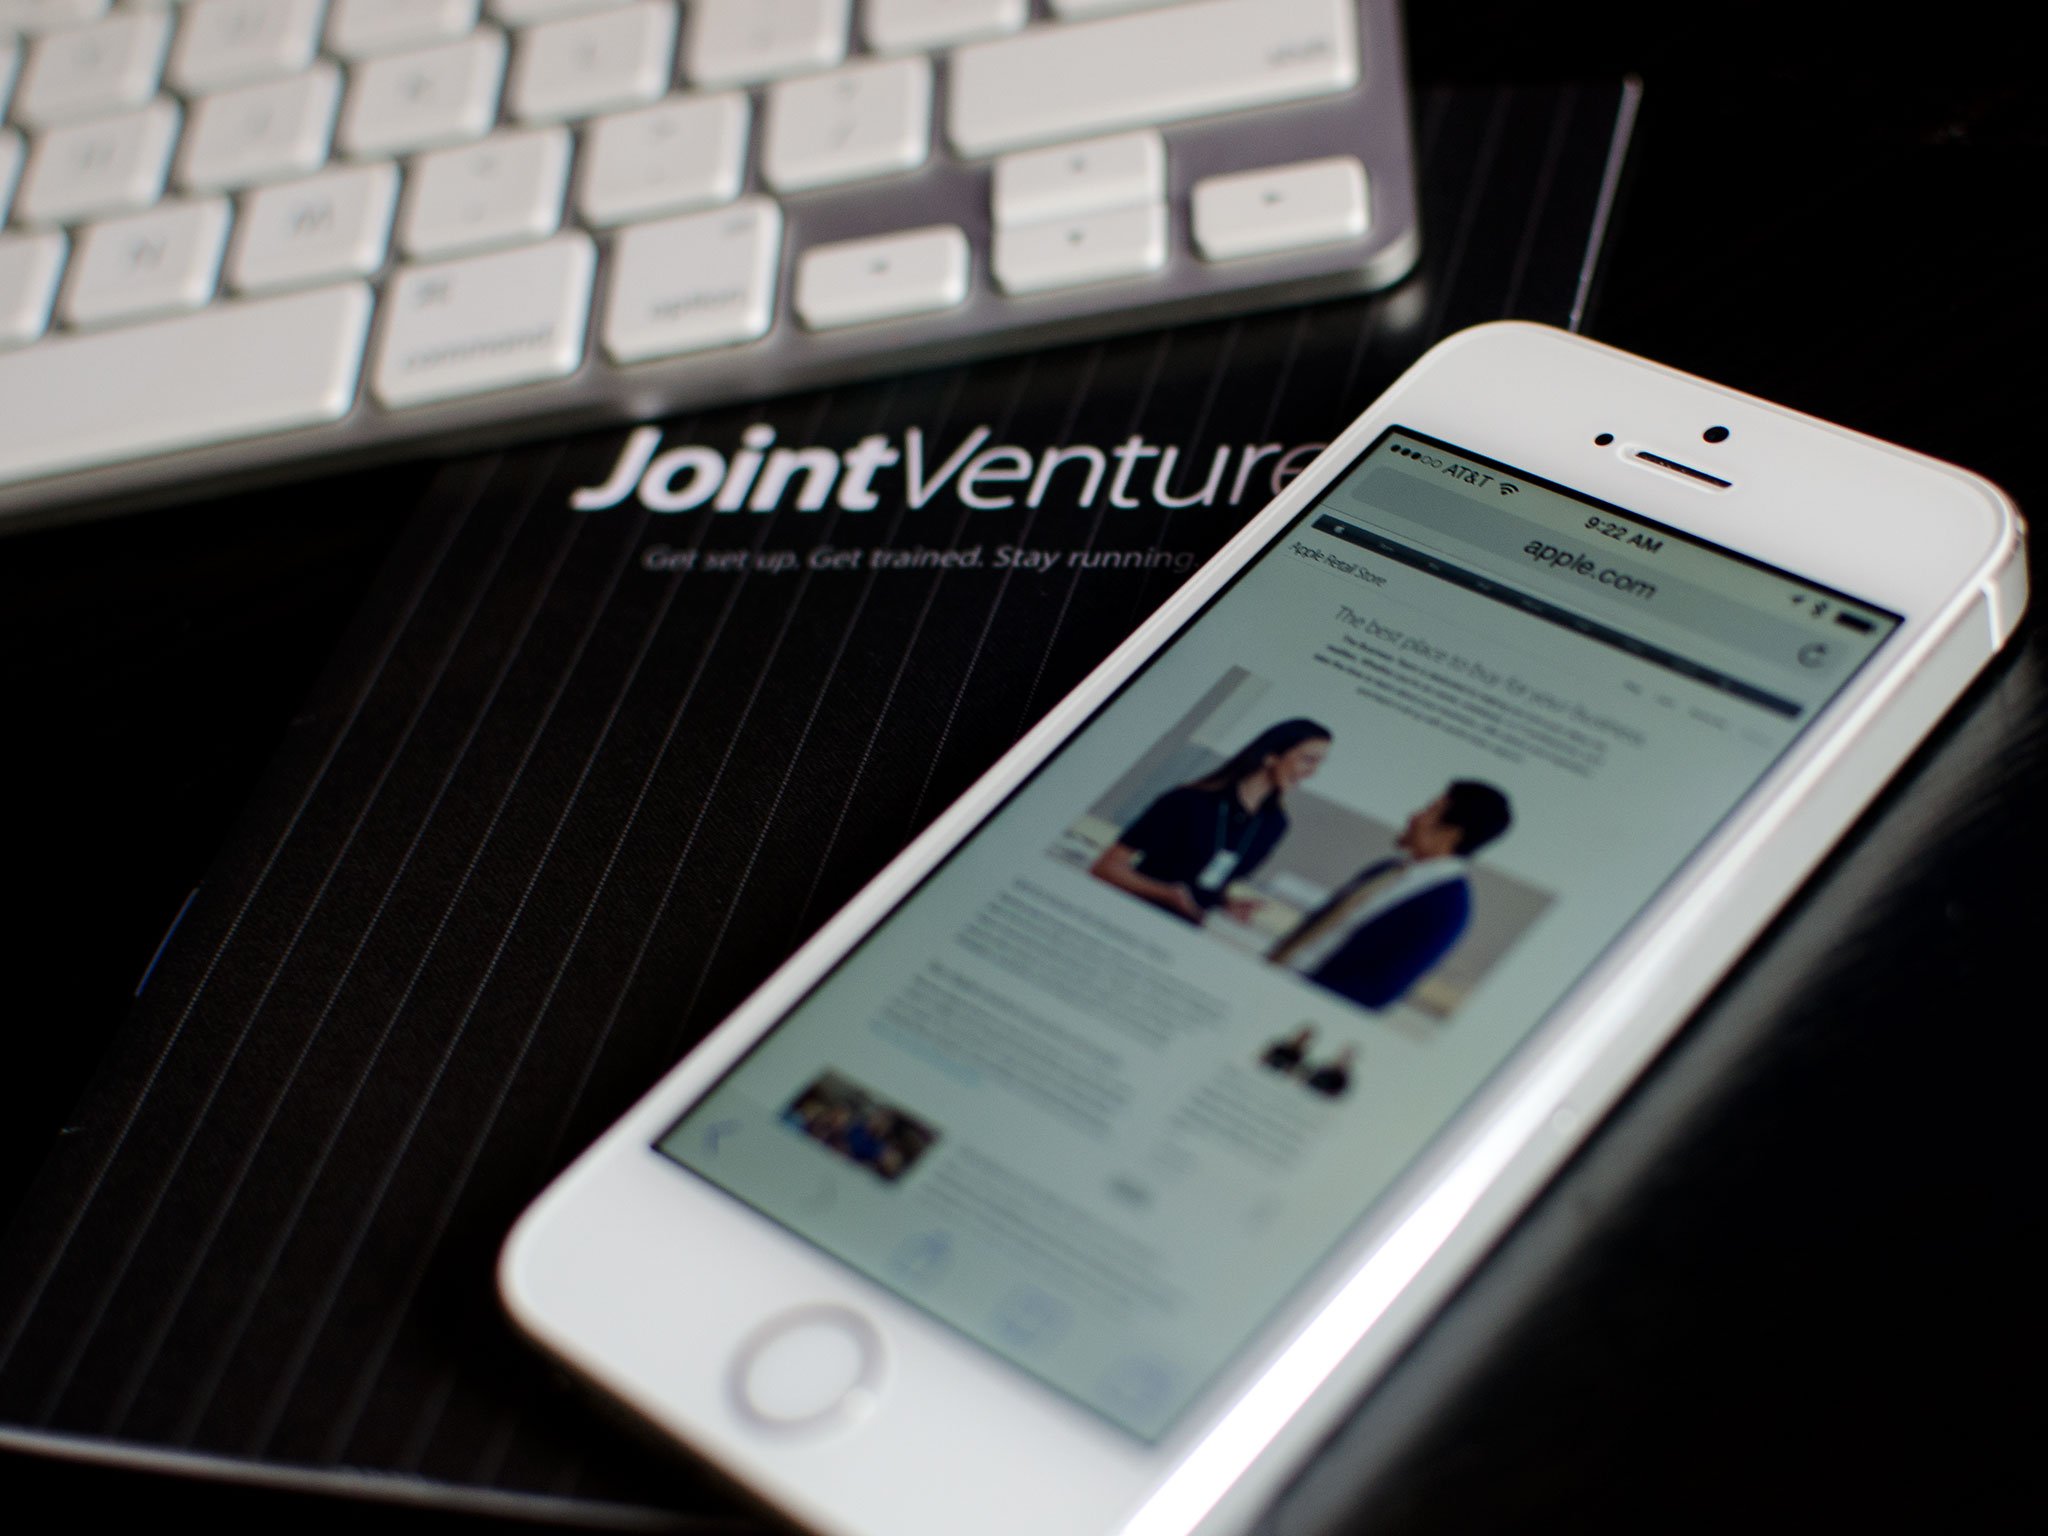 How to earn discounts on Apple products for business with Joint Venture